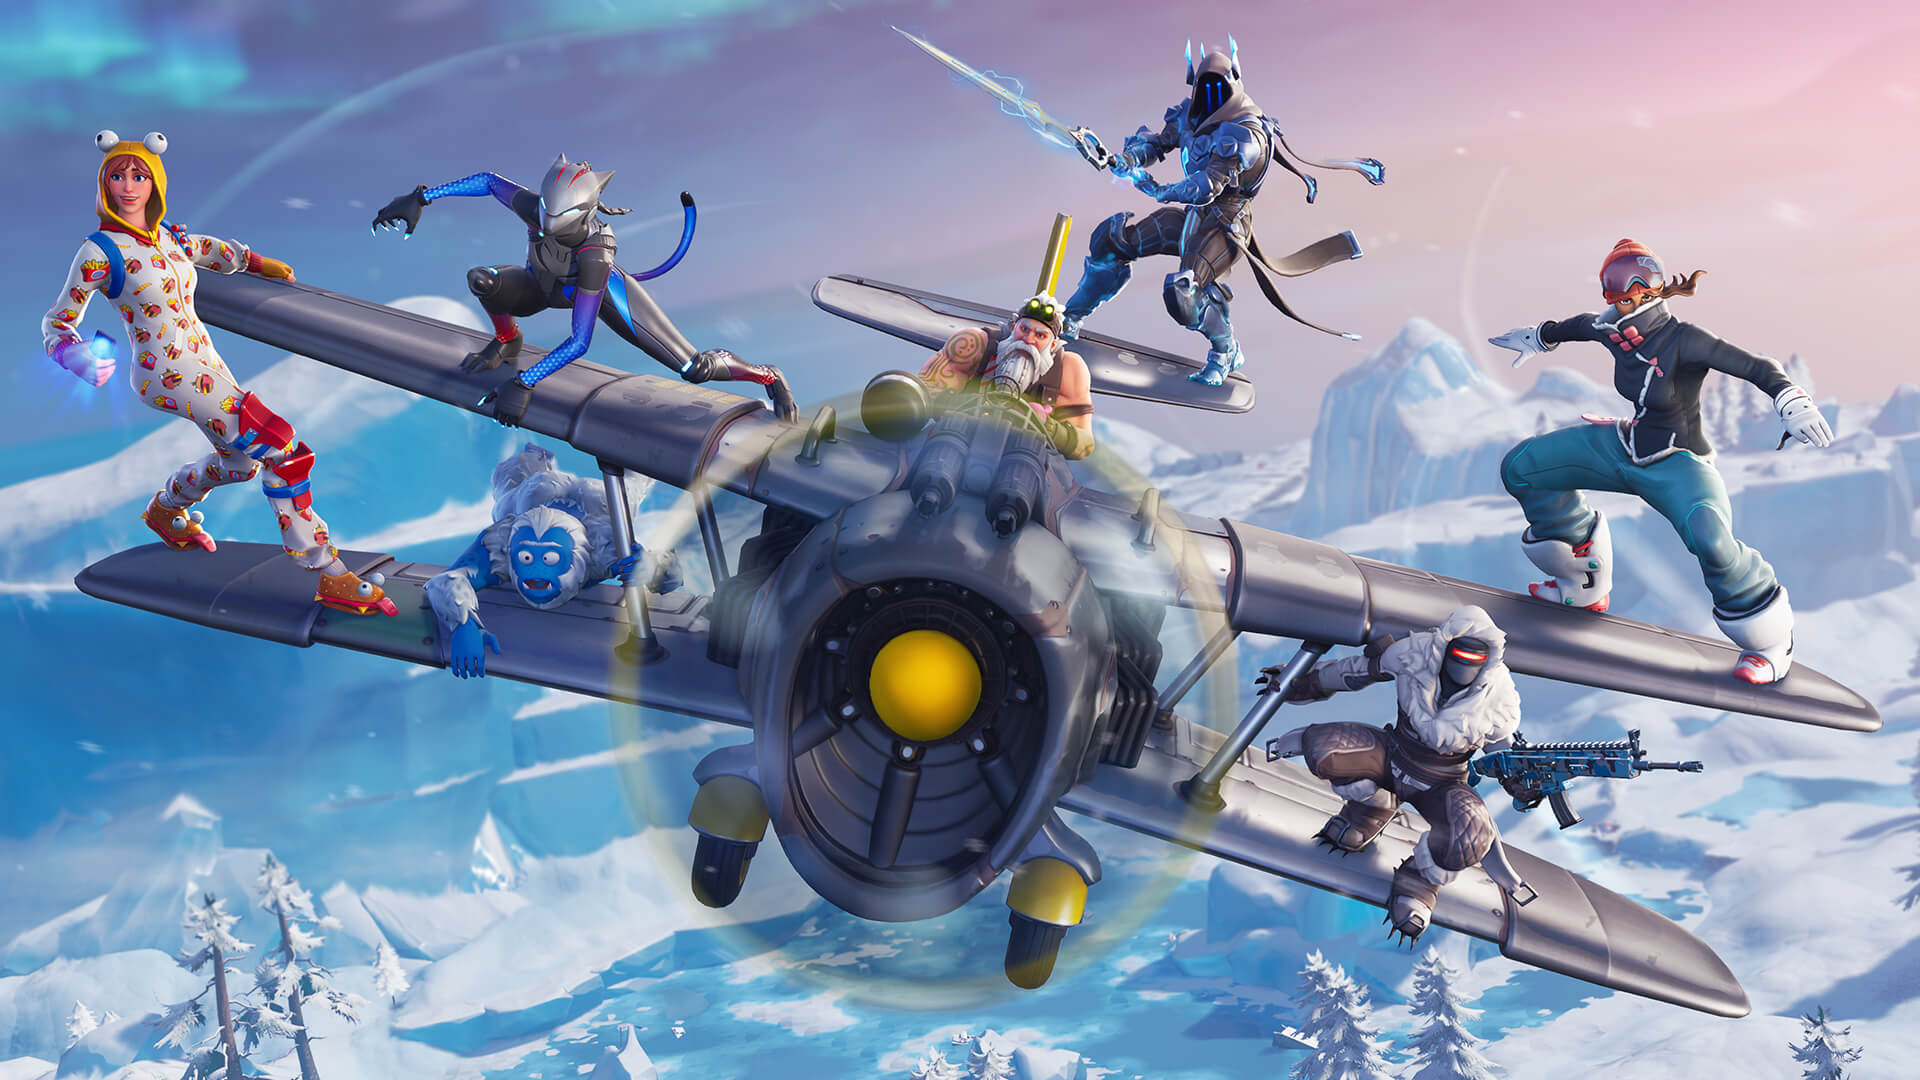 Where To Find The Secret Battle Star In Fortnite Season 7 Week 1 - where to find the secret battle star in fortnite season 7 week 1